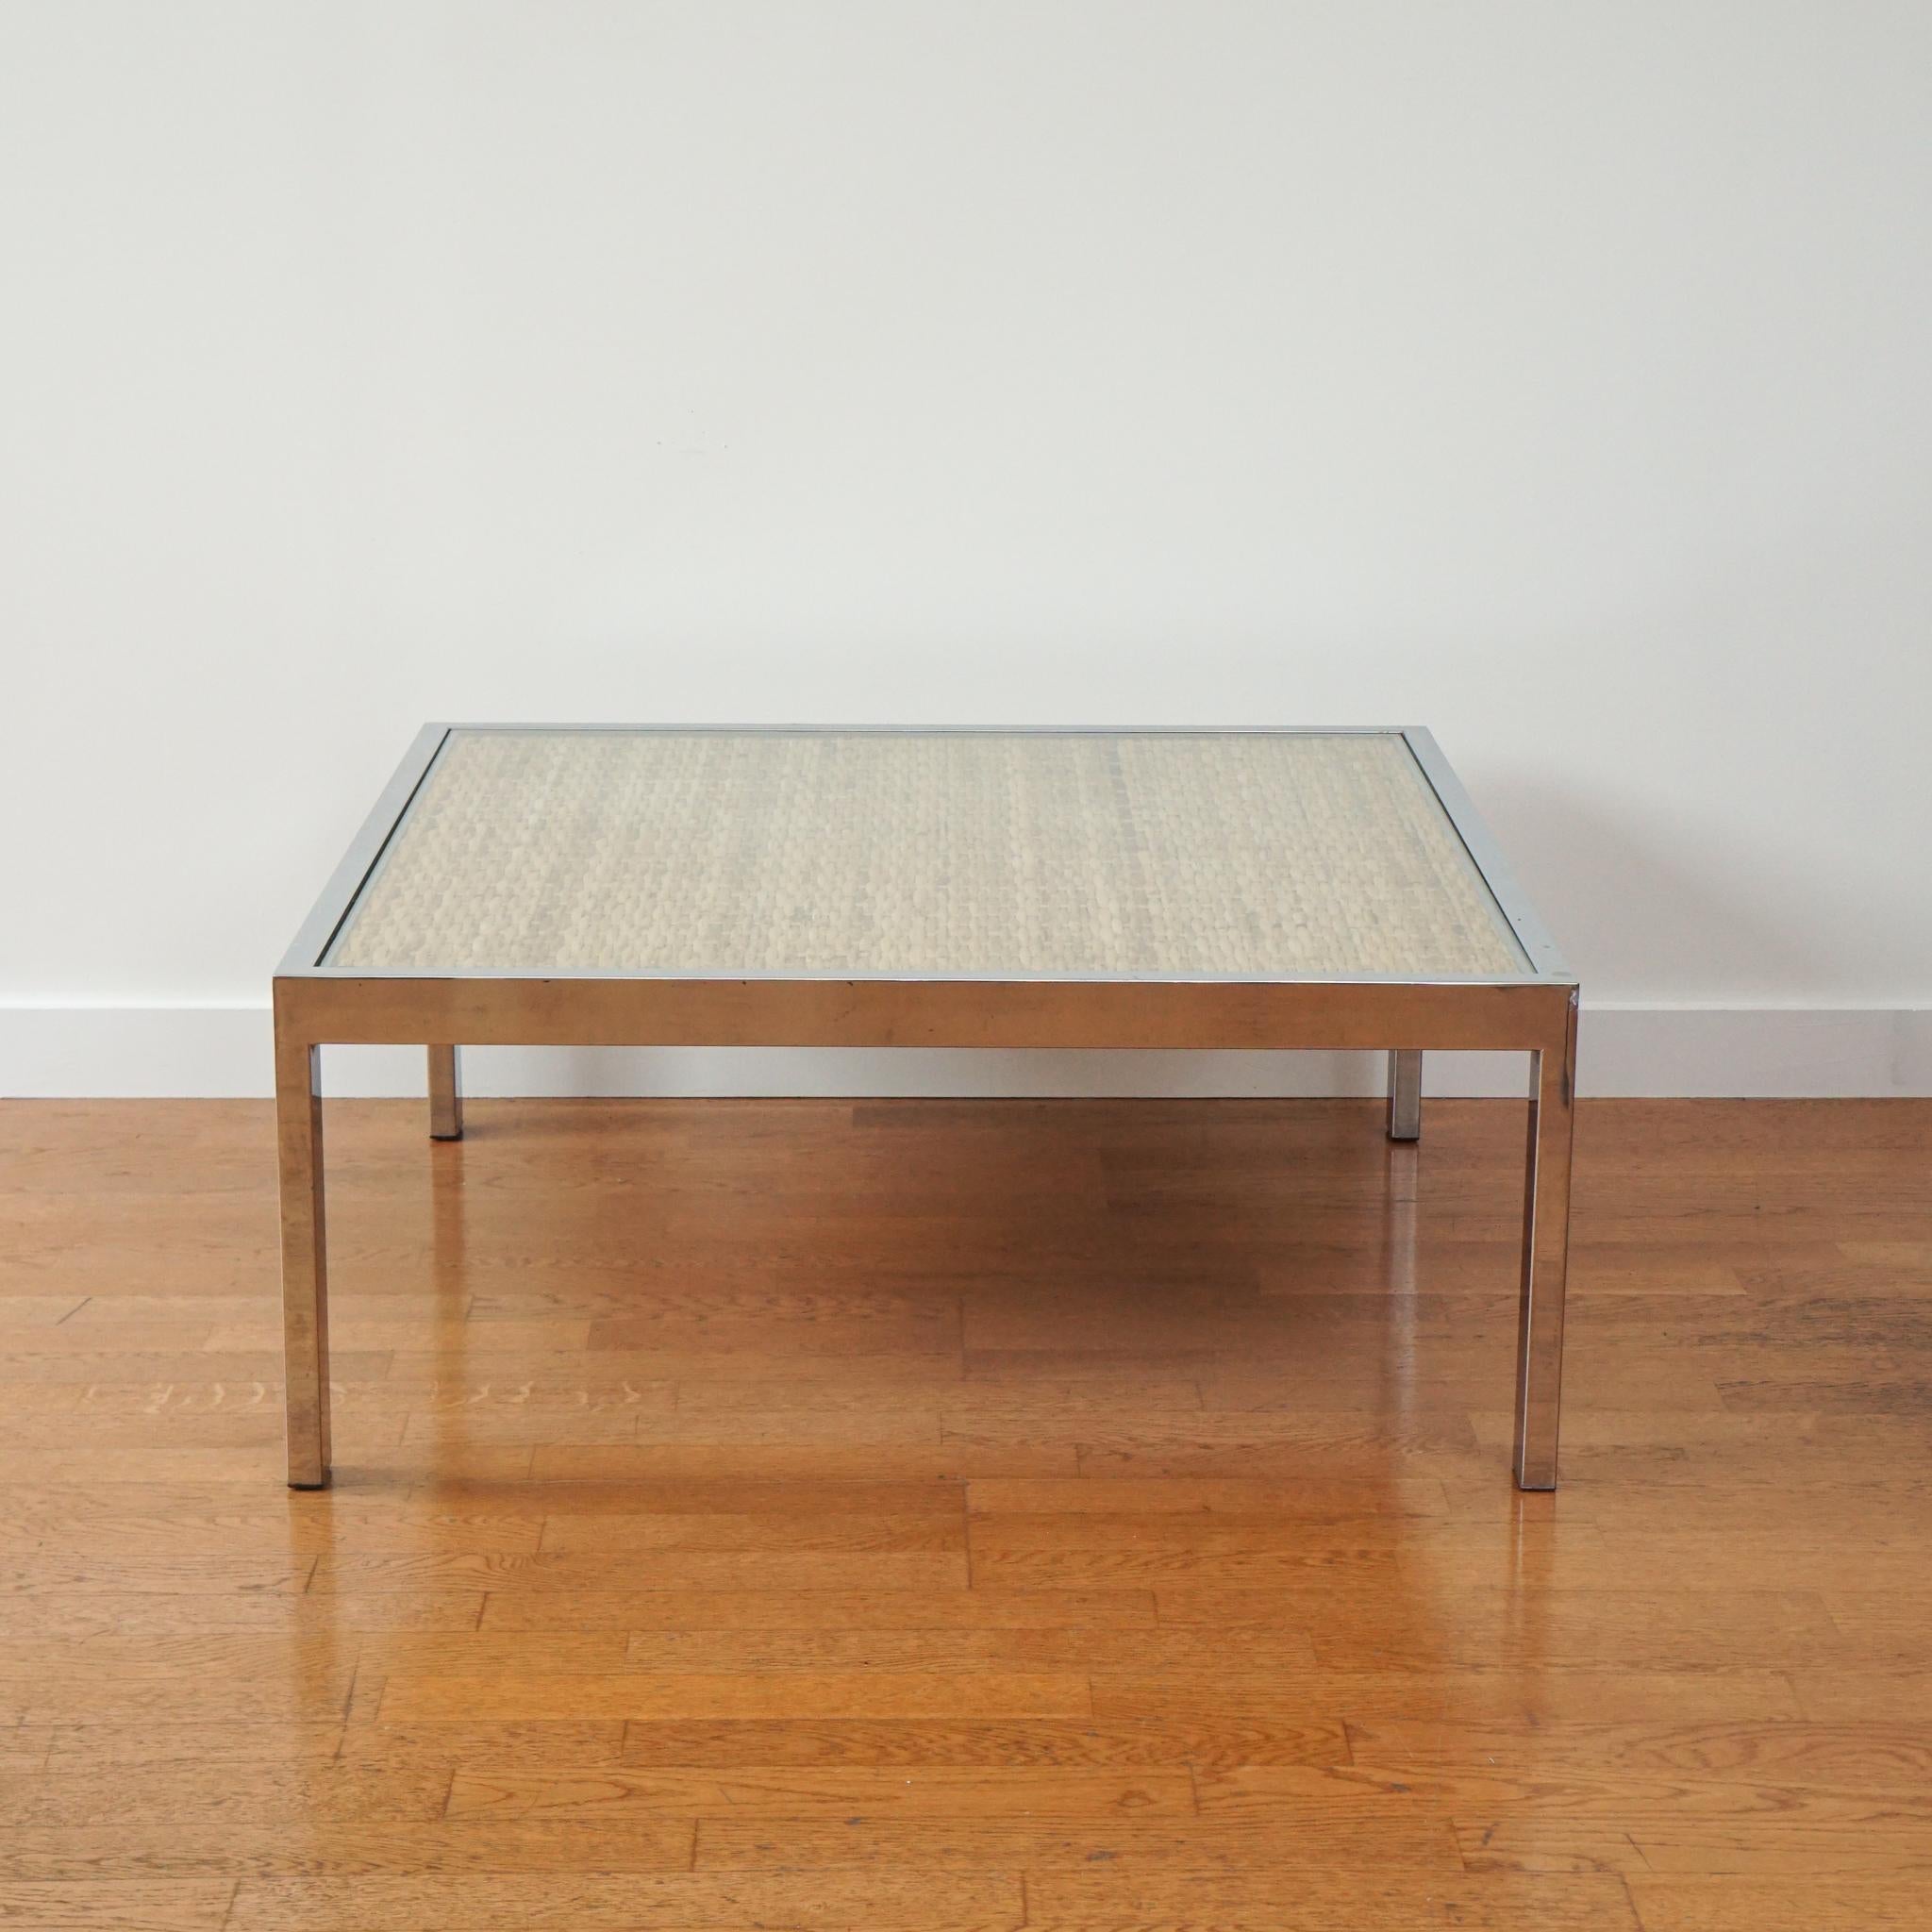 Square Chrome and Wicker Coffee Table In Good Condition For Sale In Hudson, NY